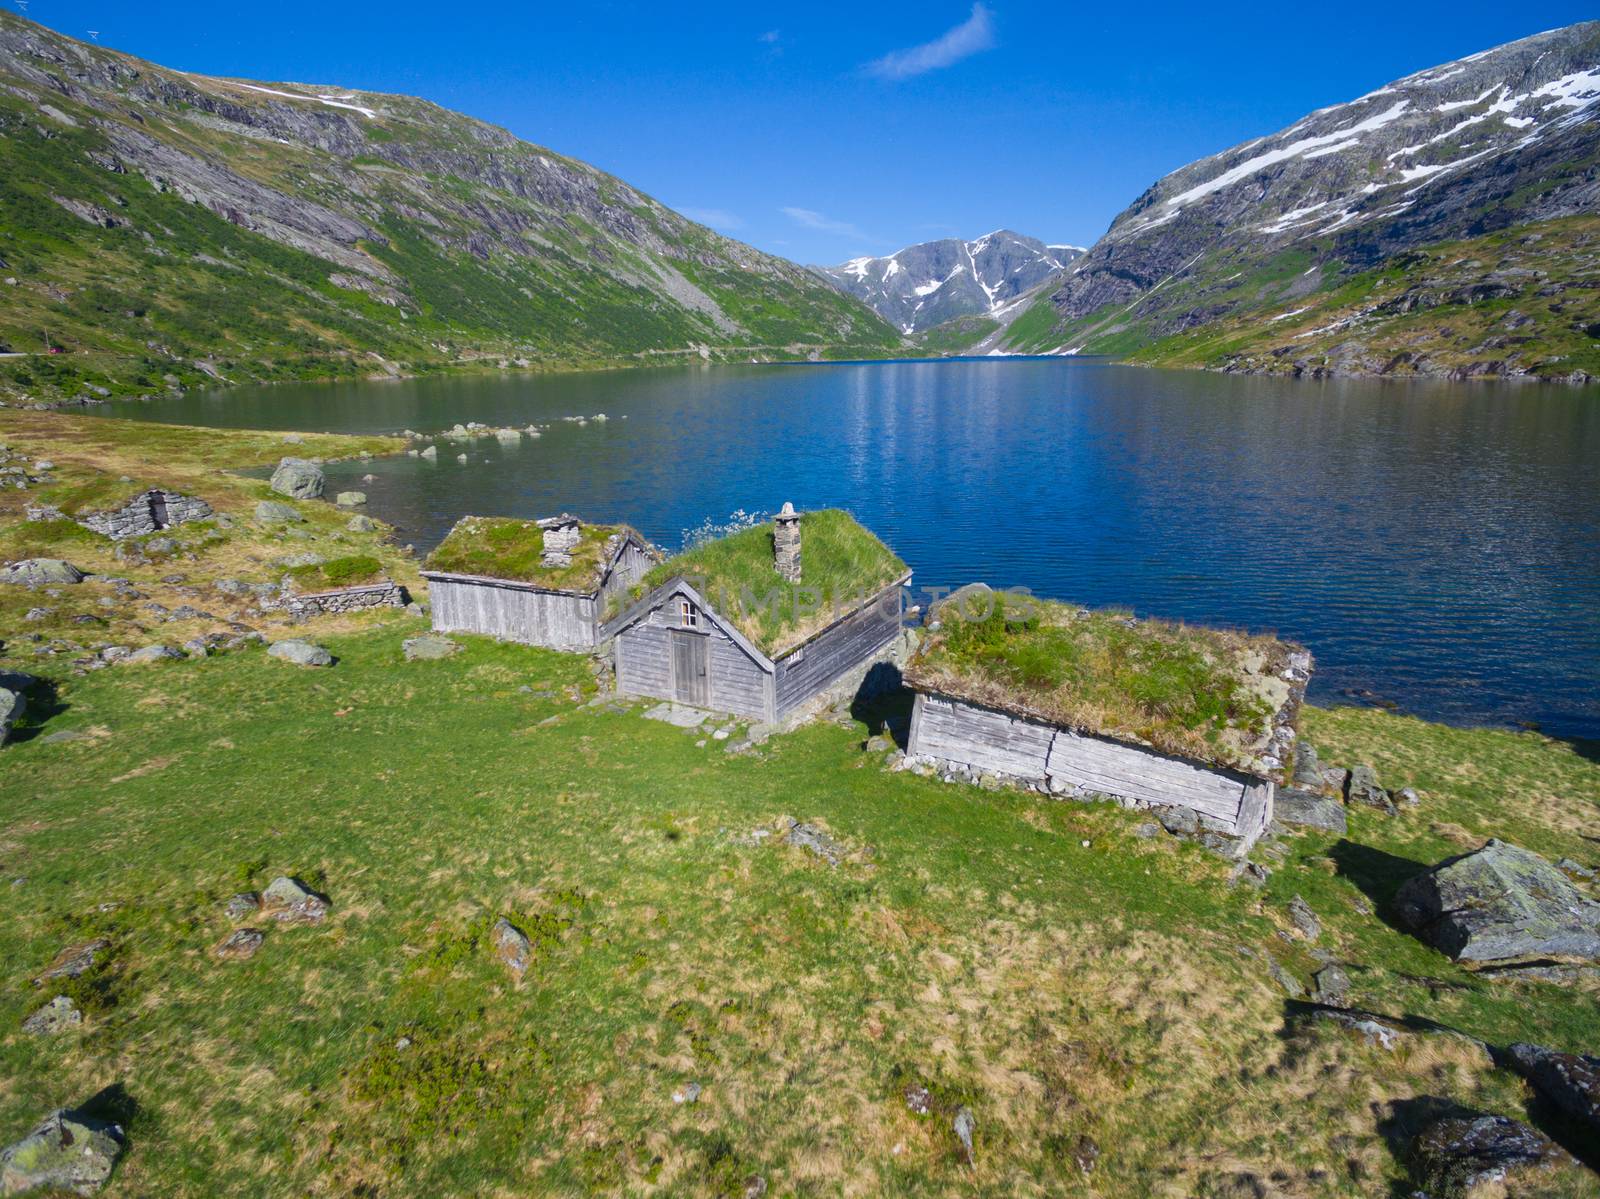 Aerial view of old norwegian huts by picturesque lake surrounded by mountains in Gaularfjellet mountain pass in Norway